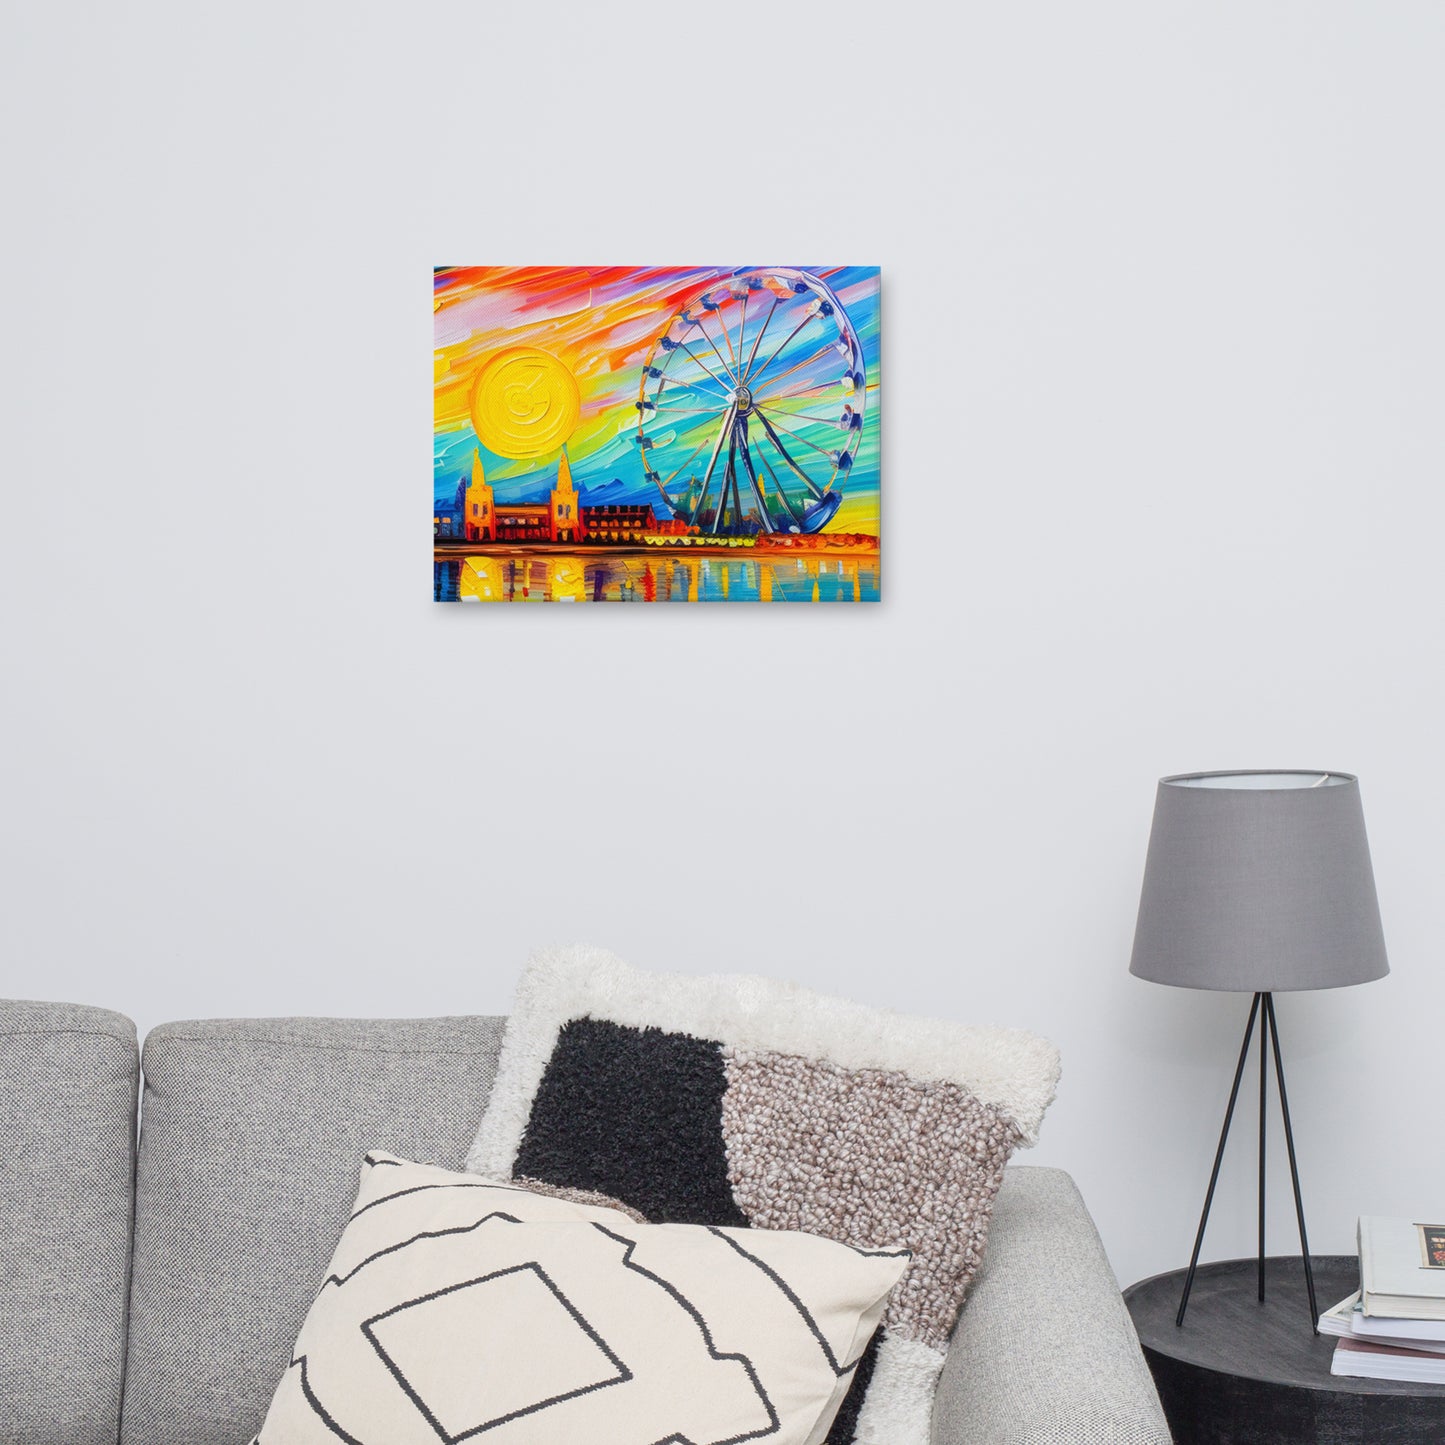  Artistic canvas print showcasing Vienna's famous Prater Ferris wheel, an iconic symbol of the city's charm and history. | Seepu